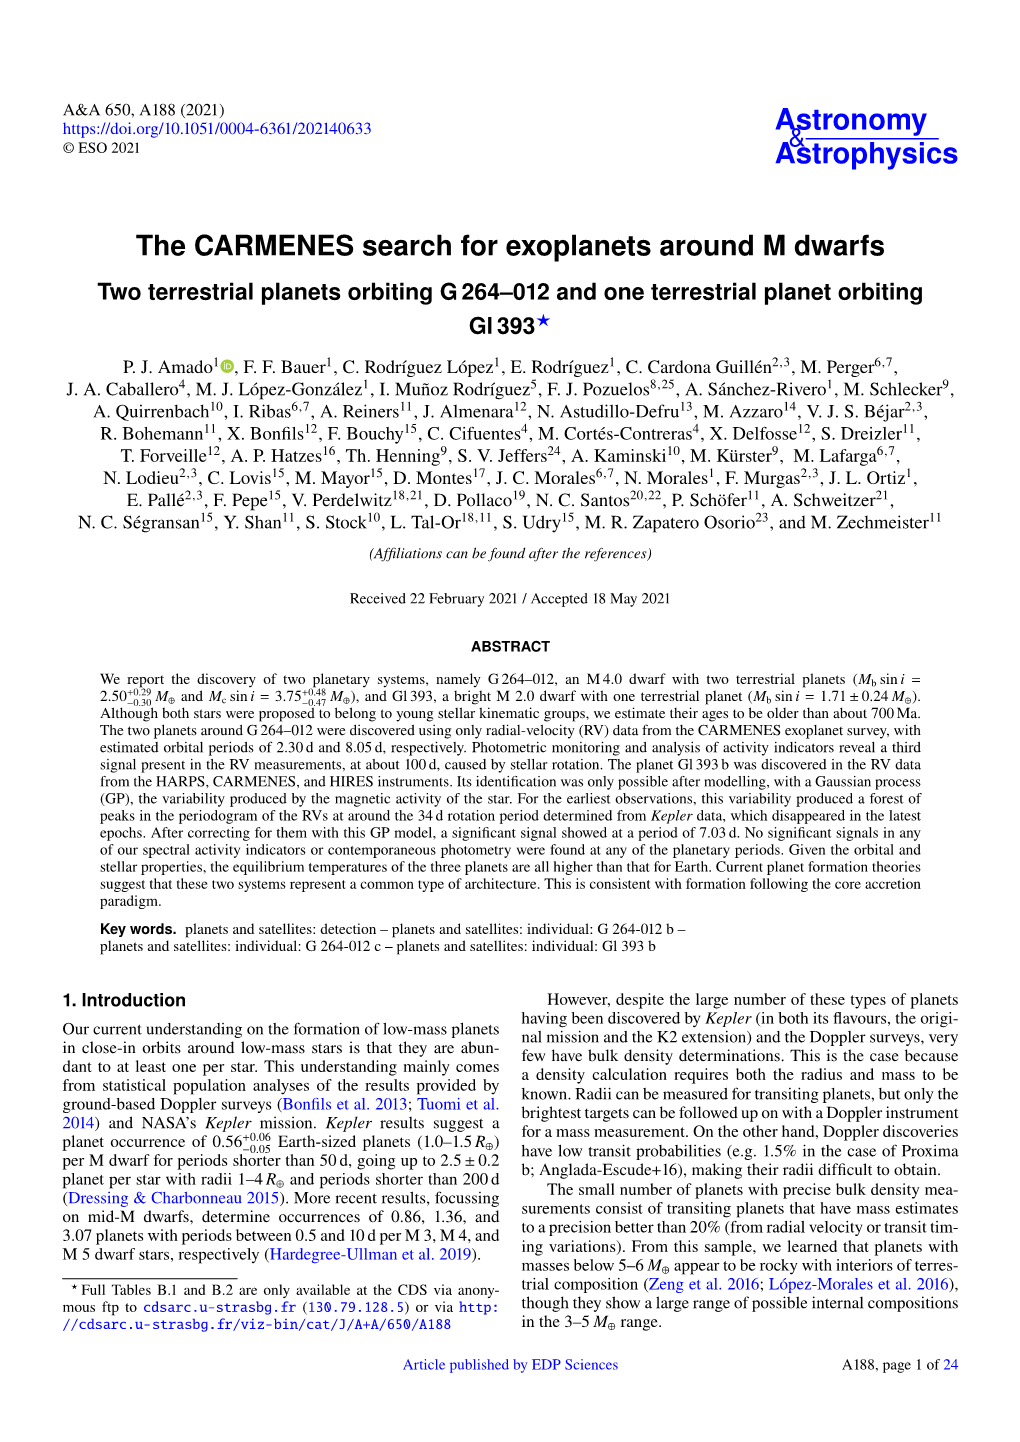 The CARMENES Search for Exoplanets Around M Dwarfs Two Terrestrial Planets Orbiting G 264–012 and One Terrestrial Planet Orbiting Gl 393? P